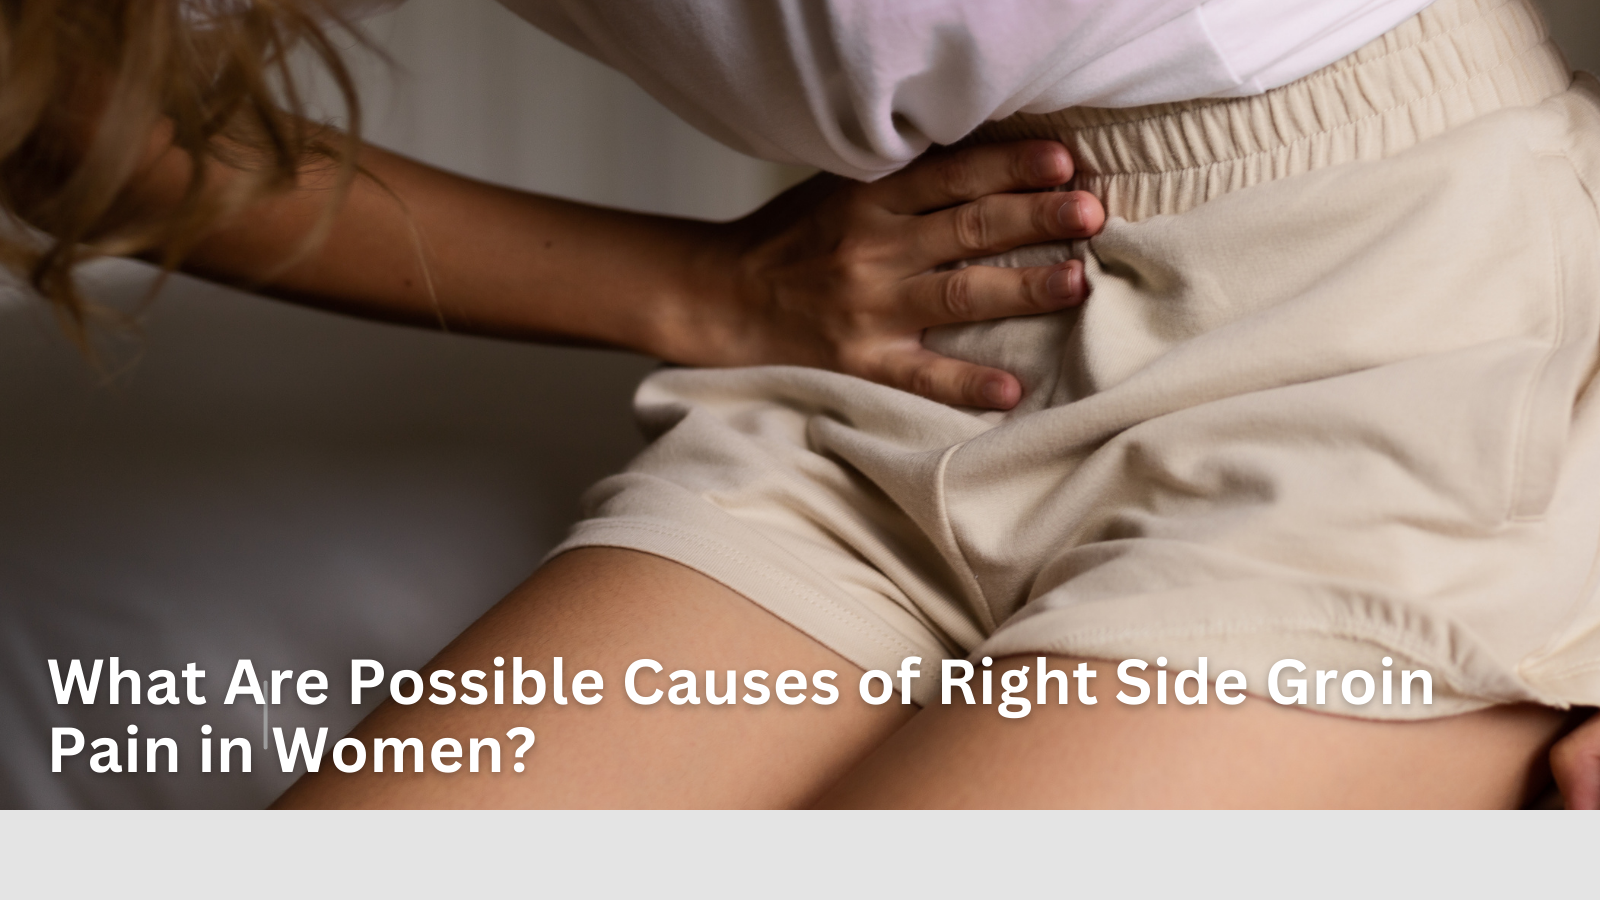 What Are Possible Causes of Right Side Groin Pain in Women?